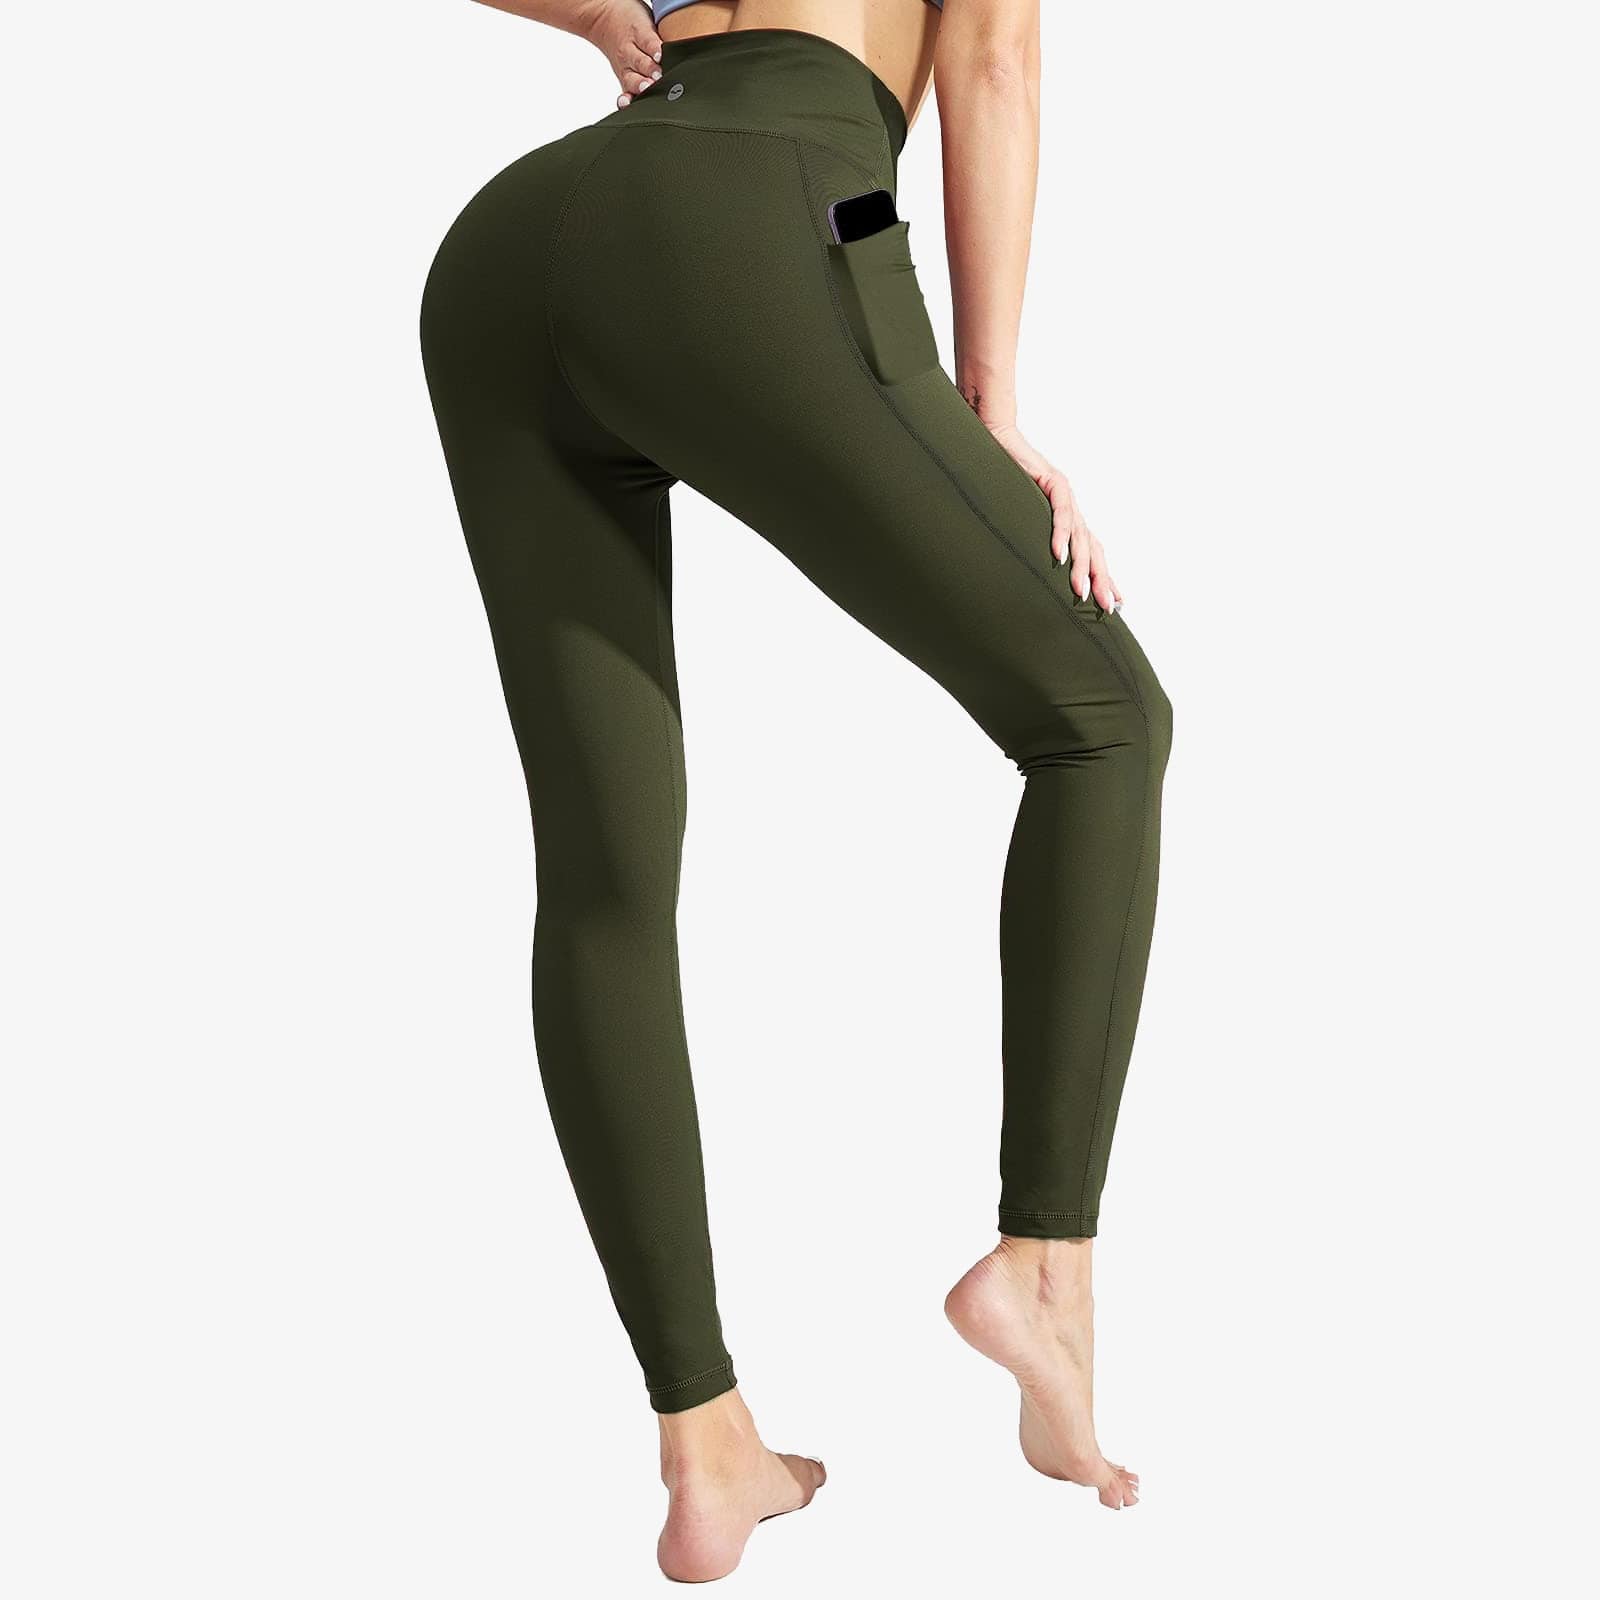 Women High Waist Workout Yoga Pants Athletic Legging with Pockets Women Yoga Pants Army Green / S MIER